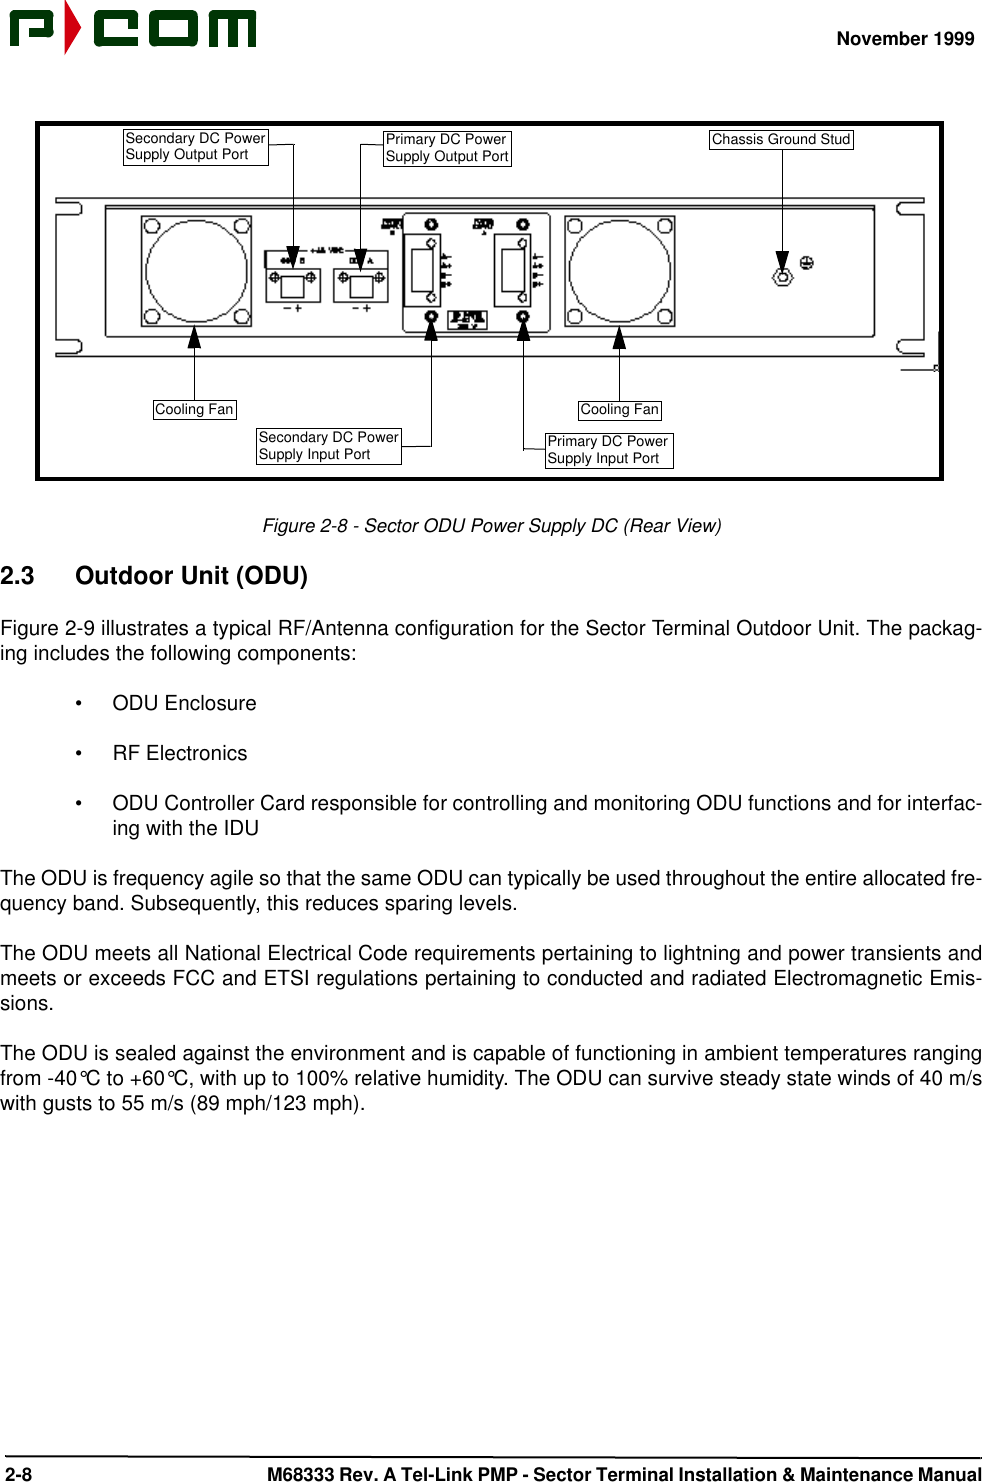 November 1999 2-8  M68333 Rev. A Tel-Link PMP - Sector Terminal Installation &amp; Maintenance ManualFigure 2-8 - Sector ODU Power Supply DC (Rear View)2.3 Outdoor Unit (ODU)Figure 2-9 illustrates a typical RF/Antenna configuration for the Sector Terminal Outdoor Unit. The packag-ing includes the following components:•ODU Enclosure•RF Electronics•ODU Controller Card responsible for controlling and monitoring ODU functions and for interfac-ing with the IDUThe ODU is frequency agile so that the same ODU can typically be used throughout the entire allocated fre-quency band. Subsequently, this reduces sparing levels.The ODU meets all National Electrical Code requirements pertaining to lightning and power transients andmeets or exceeds FCC and ETSI regulations pertaining to conducted and radiated Electromagnetic Emis-sions.The ODU is sealed against the environment and is capable of functioning in ambient temperatures rangingfrom -40°C to +60°C, with up to 100% relative humidity. The ODU can survive steady state winds of 40 m/swith gusts to 55 m/s (89 mph/123 mph).Chassis Ground StudCooling FanPrimary DC PowerSupply Input PortSecondary DC PowerSupply Input PortSecondary DC PowerSupply Output Port Primary DC PowerSupply Output PortCooling Fan